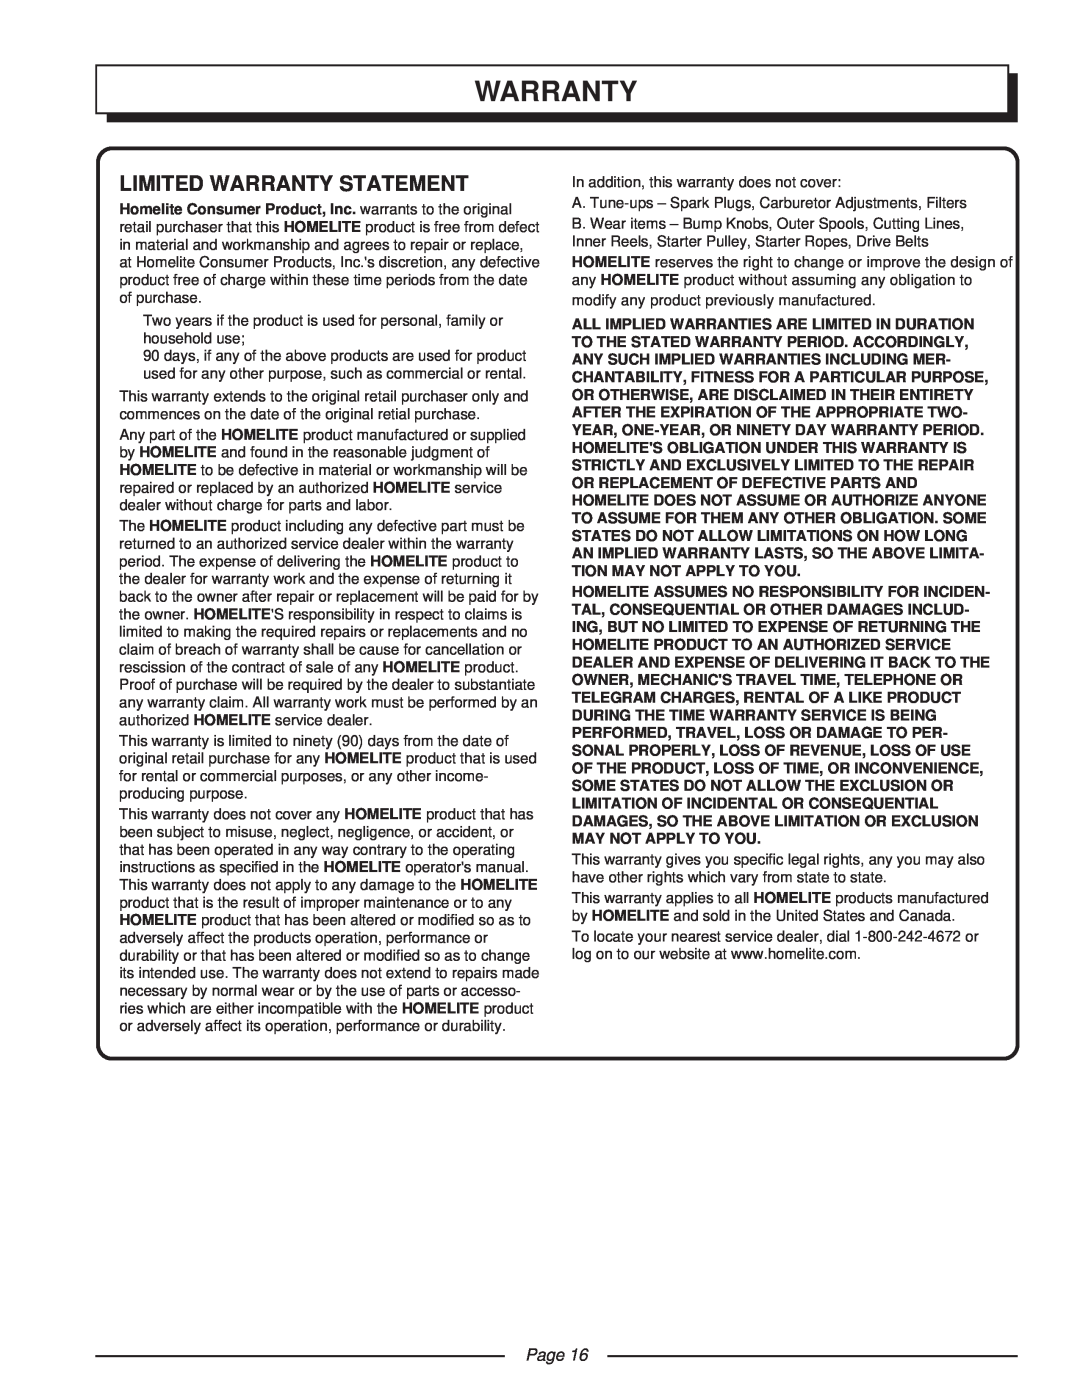 Homelite UT41002 manual Limited Warranty Statement, Page 